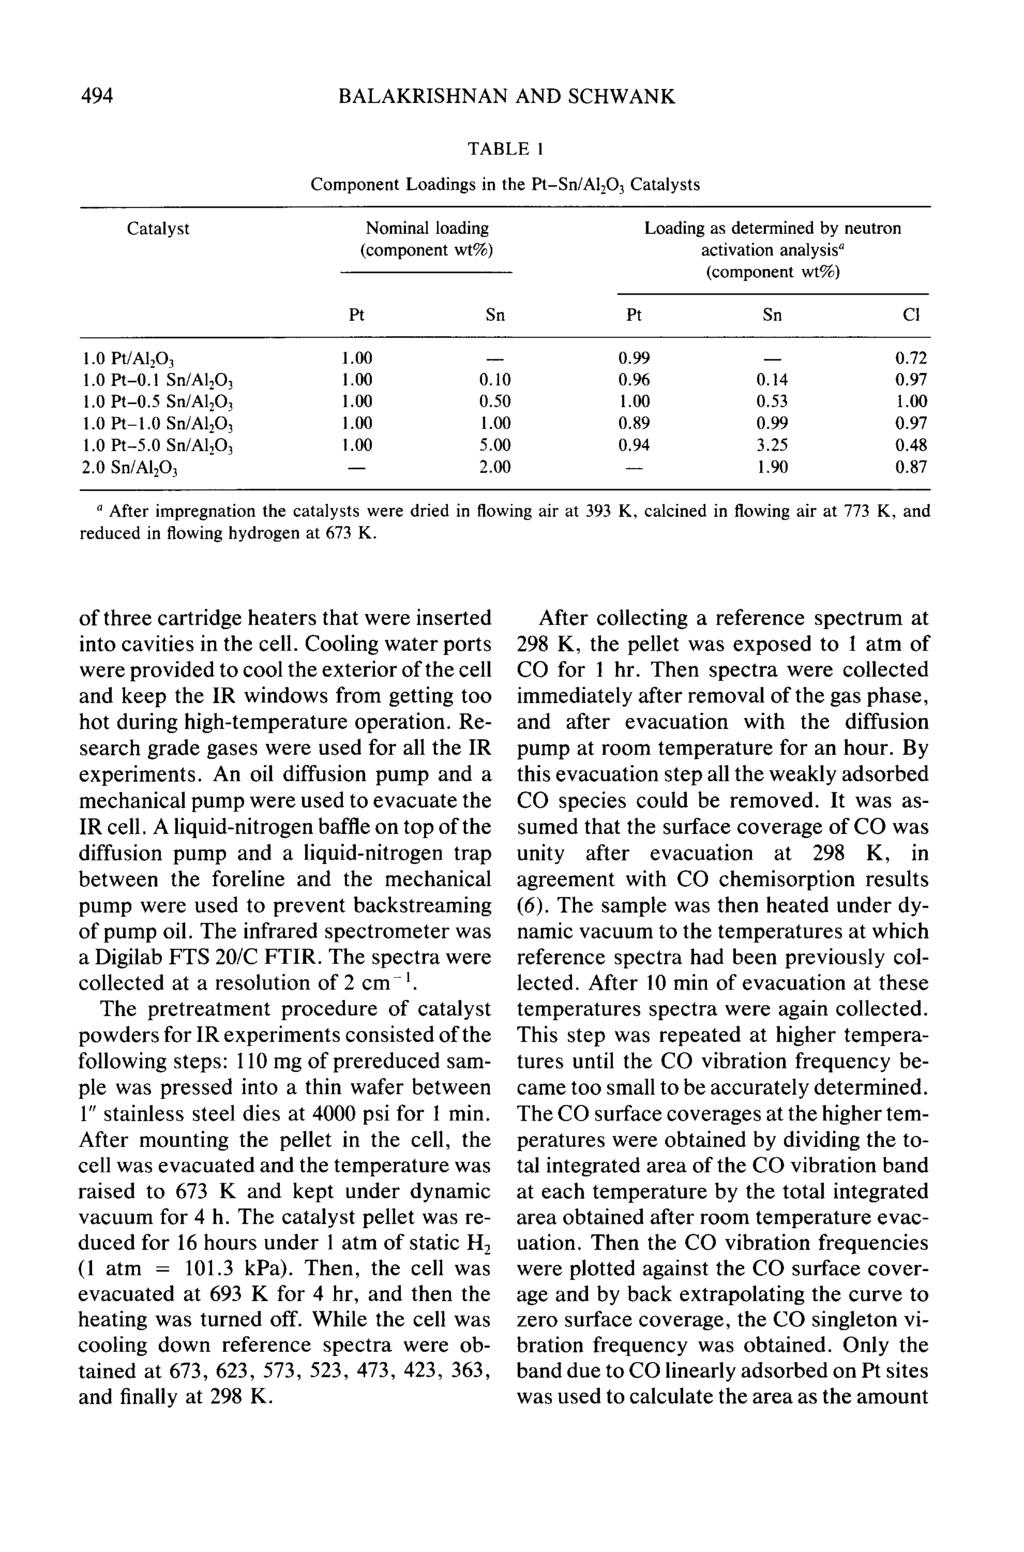 494 BALAKRISHNAN AND SCHWANK TABLE 1 Component Loadings in the Pt-Sn/AIzO3 Catalysts Catalyst Nominal loading (component wt%) Loading as determined by neutron activation analysis ~ (component wt%) Pt